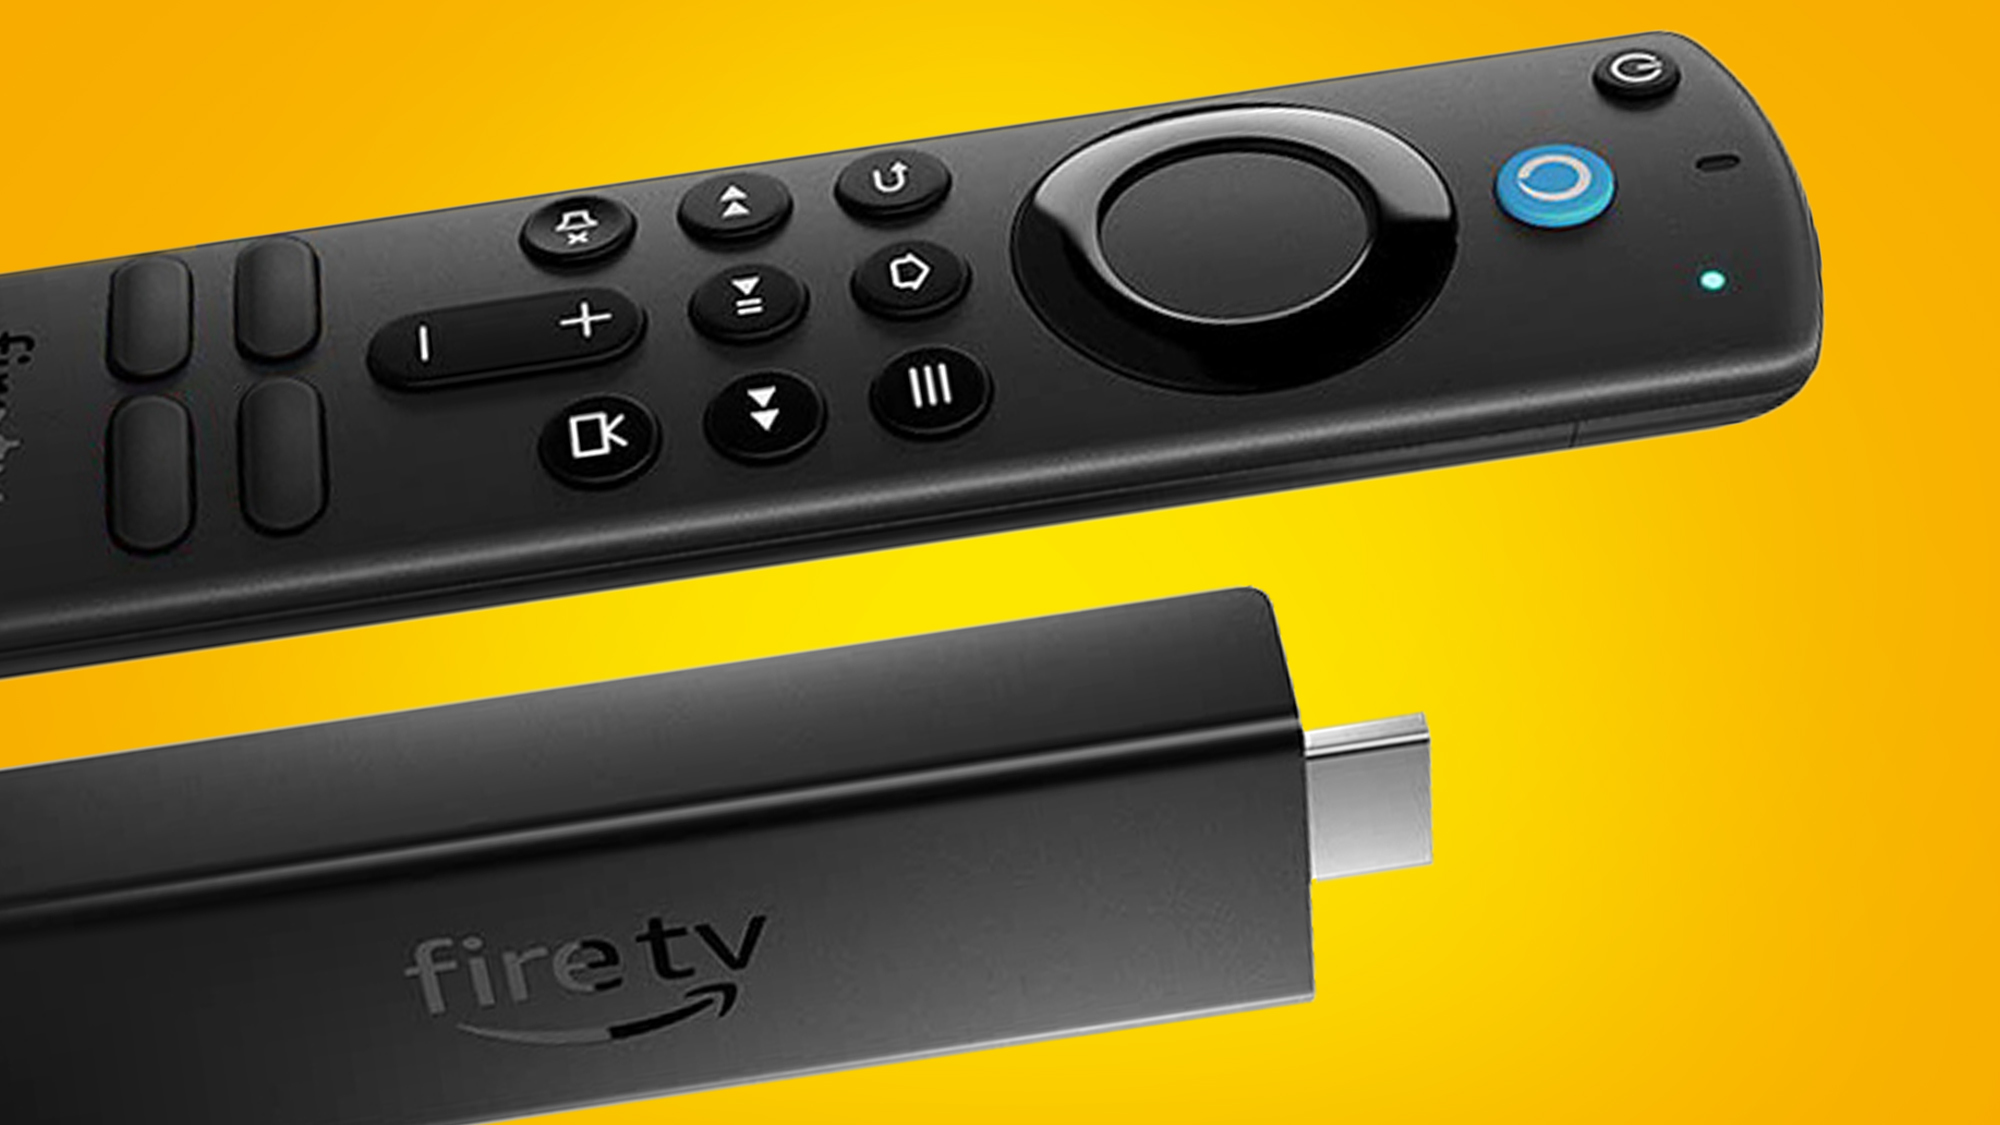 Don't buy an  Fire TV Stick 4K – two new models are likely